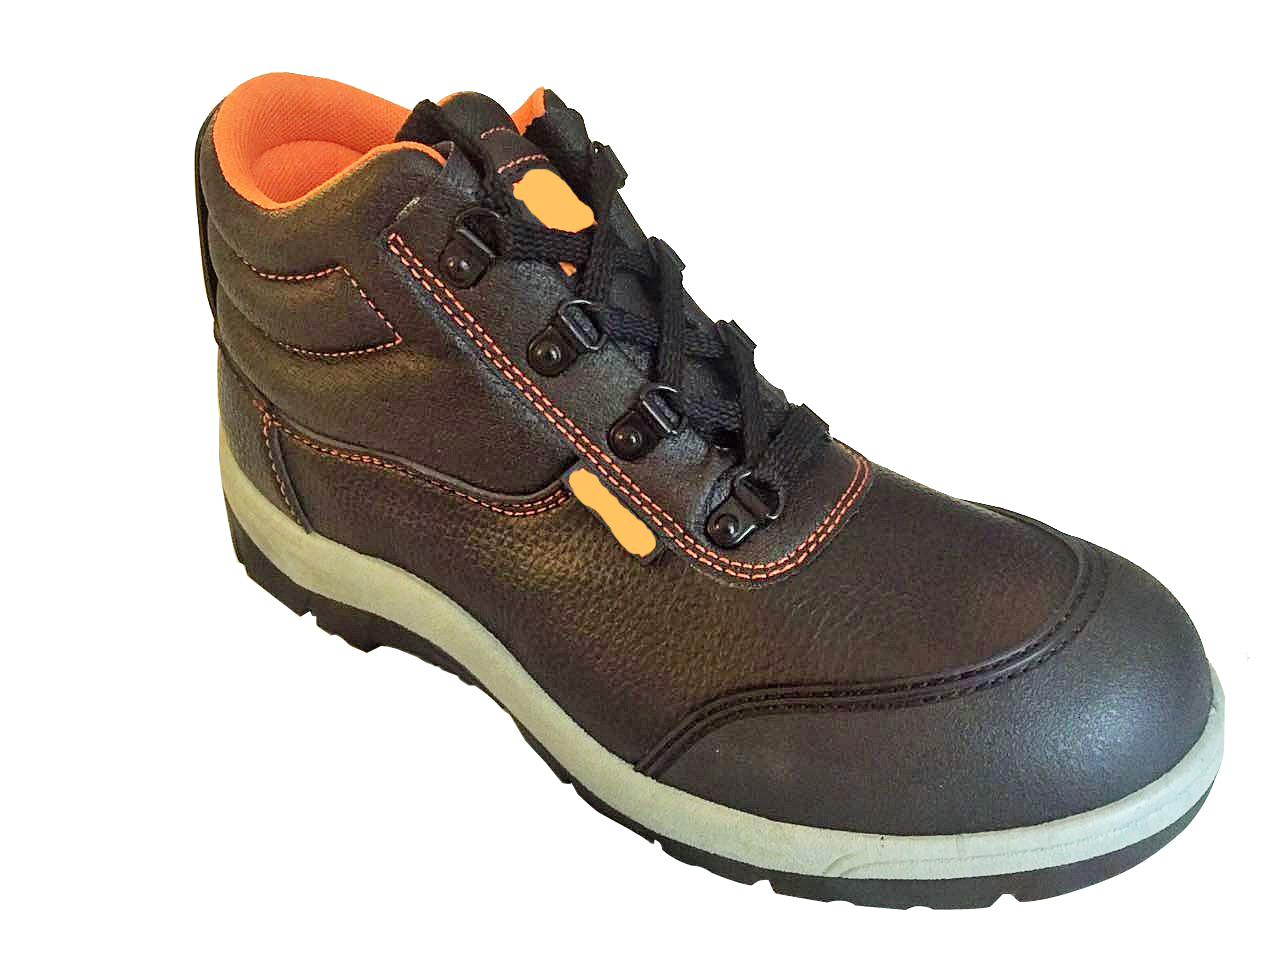 TPU reinforced toe PU artificial leather PVC injection safety shoes